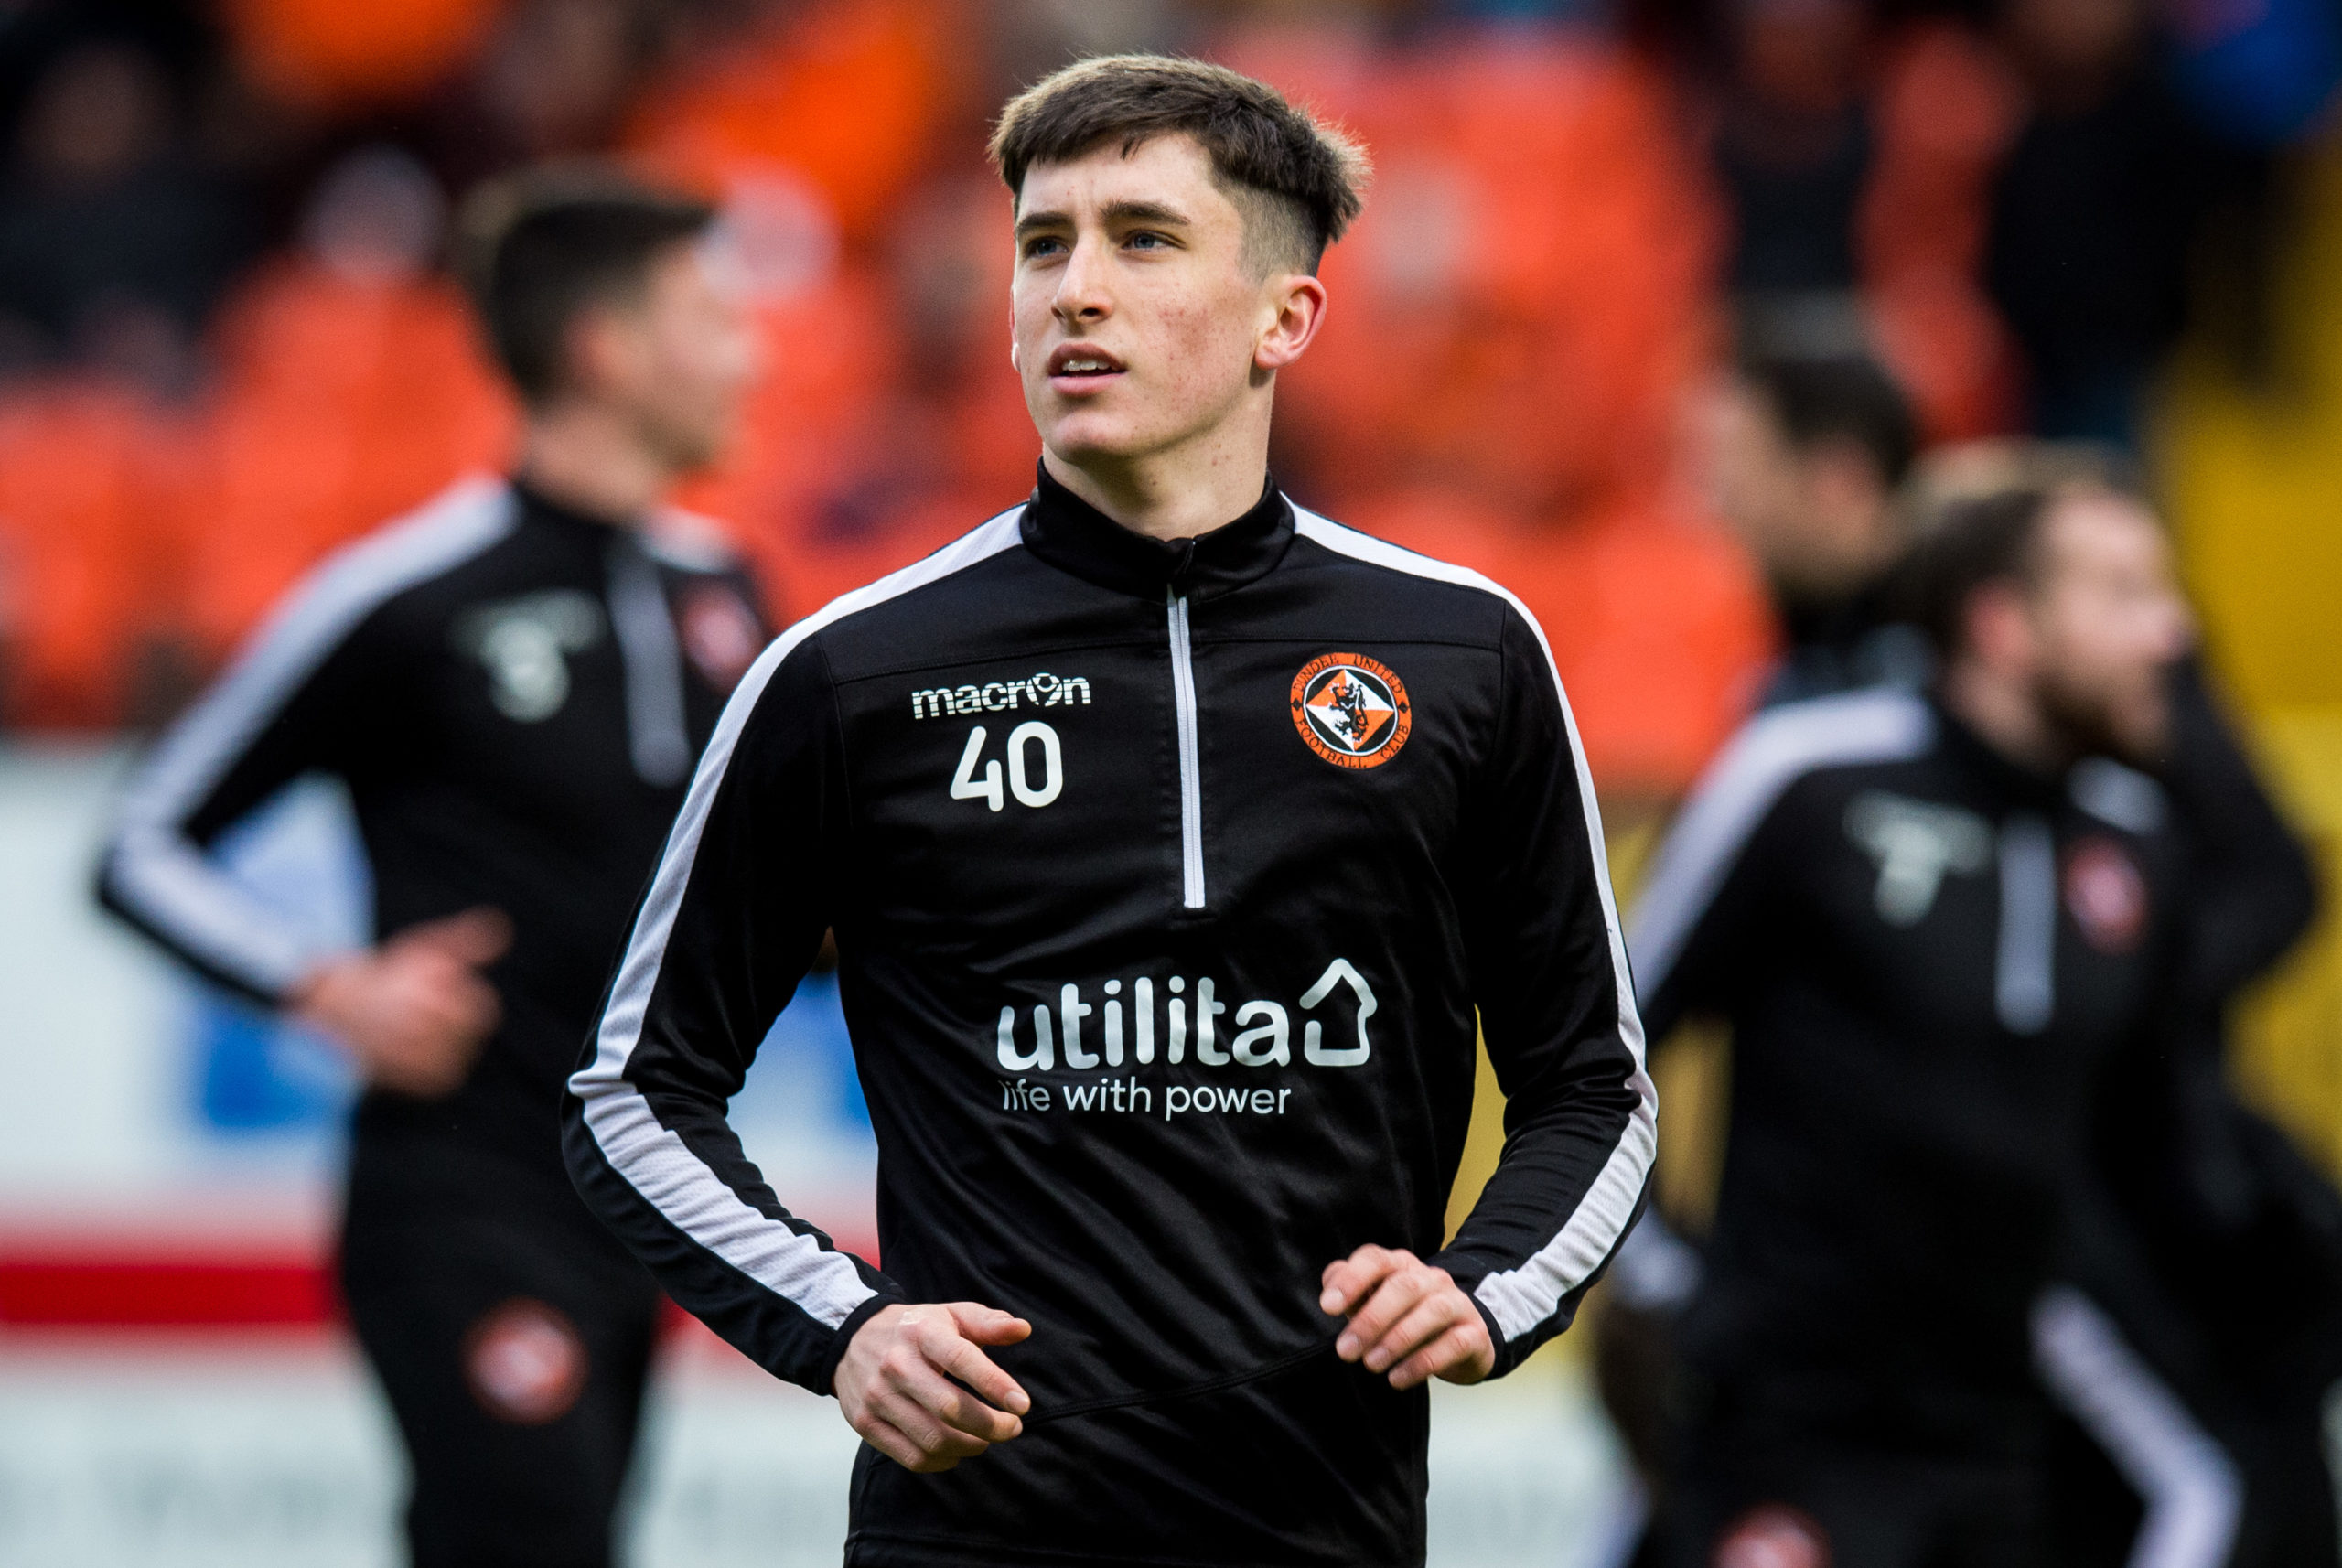 DUNDEE, SCOTLAND - JANUARY 25: Dundee Utd's Chris Mochrie ahead of the Ladbrokes Championship match between Dundee Utd and Greenock Morton at Tannadice on January 25, 2020, in Dundee, Scotland. (Photo by Ross Parker / SNS Group)